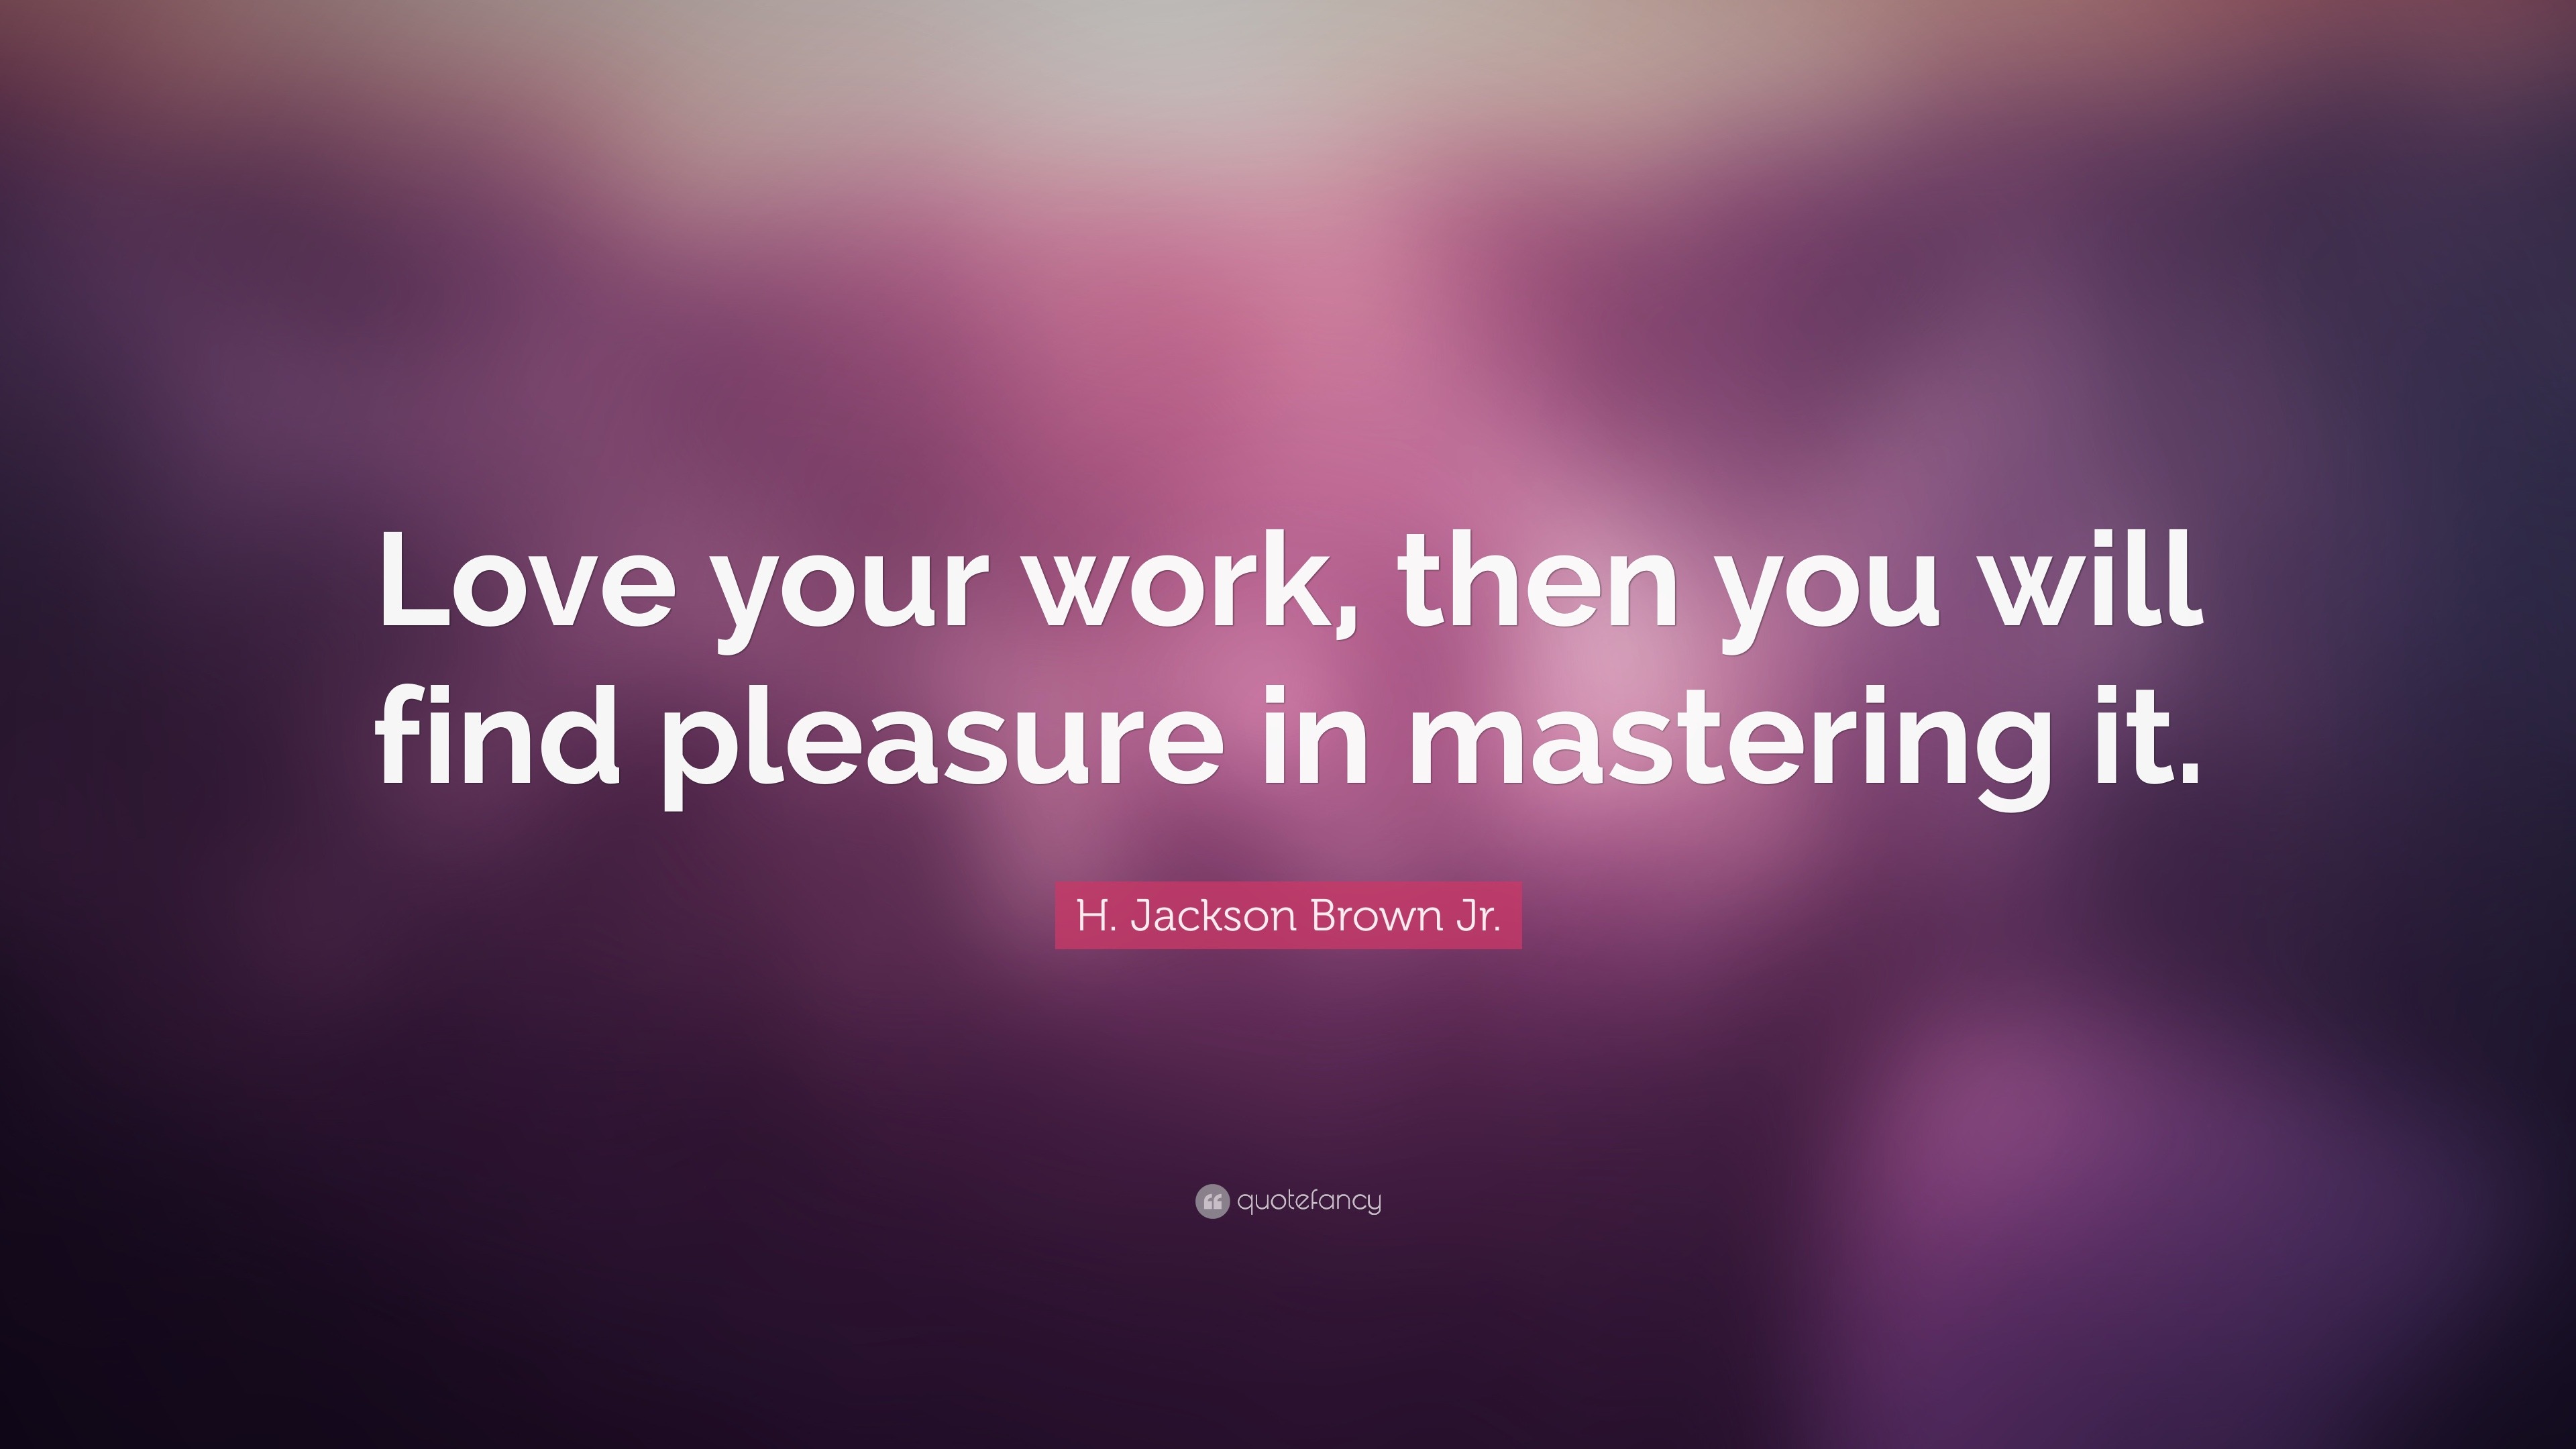 H. Jackson Brown Jr. Quote: “Love your work, then you will find